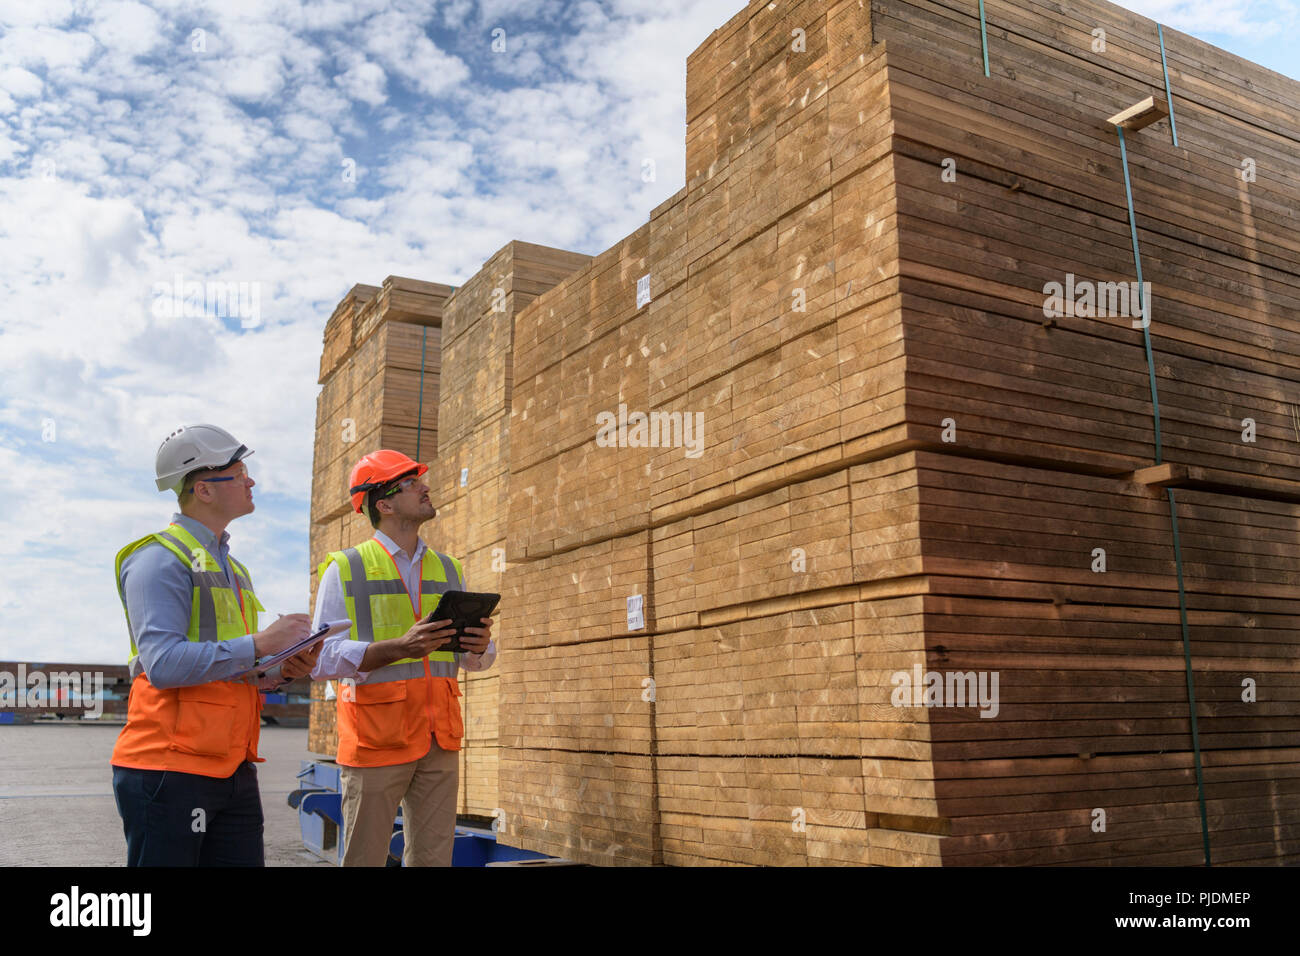 Workers with stacks of timber in storage at port Stock Photo